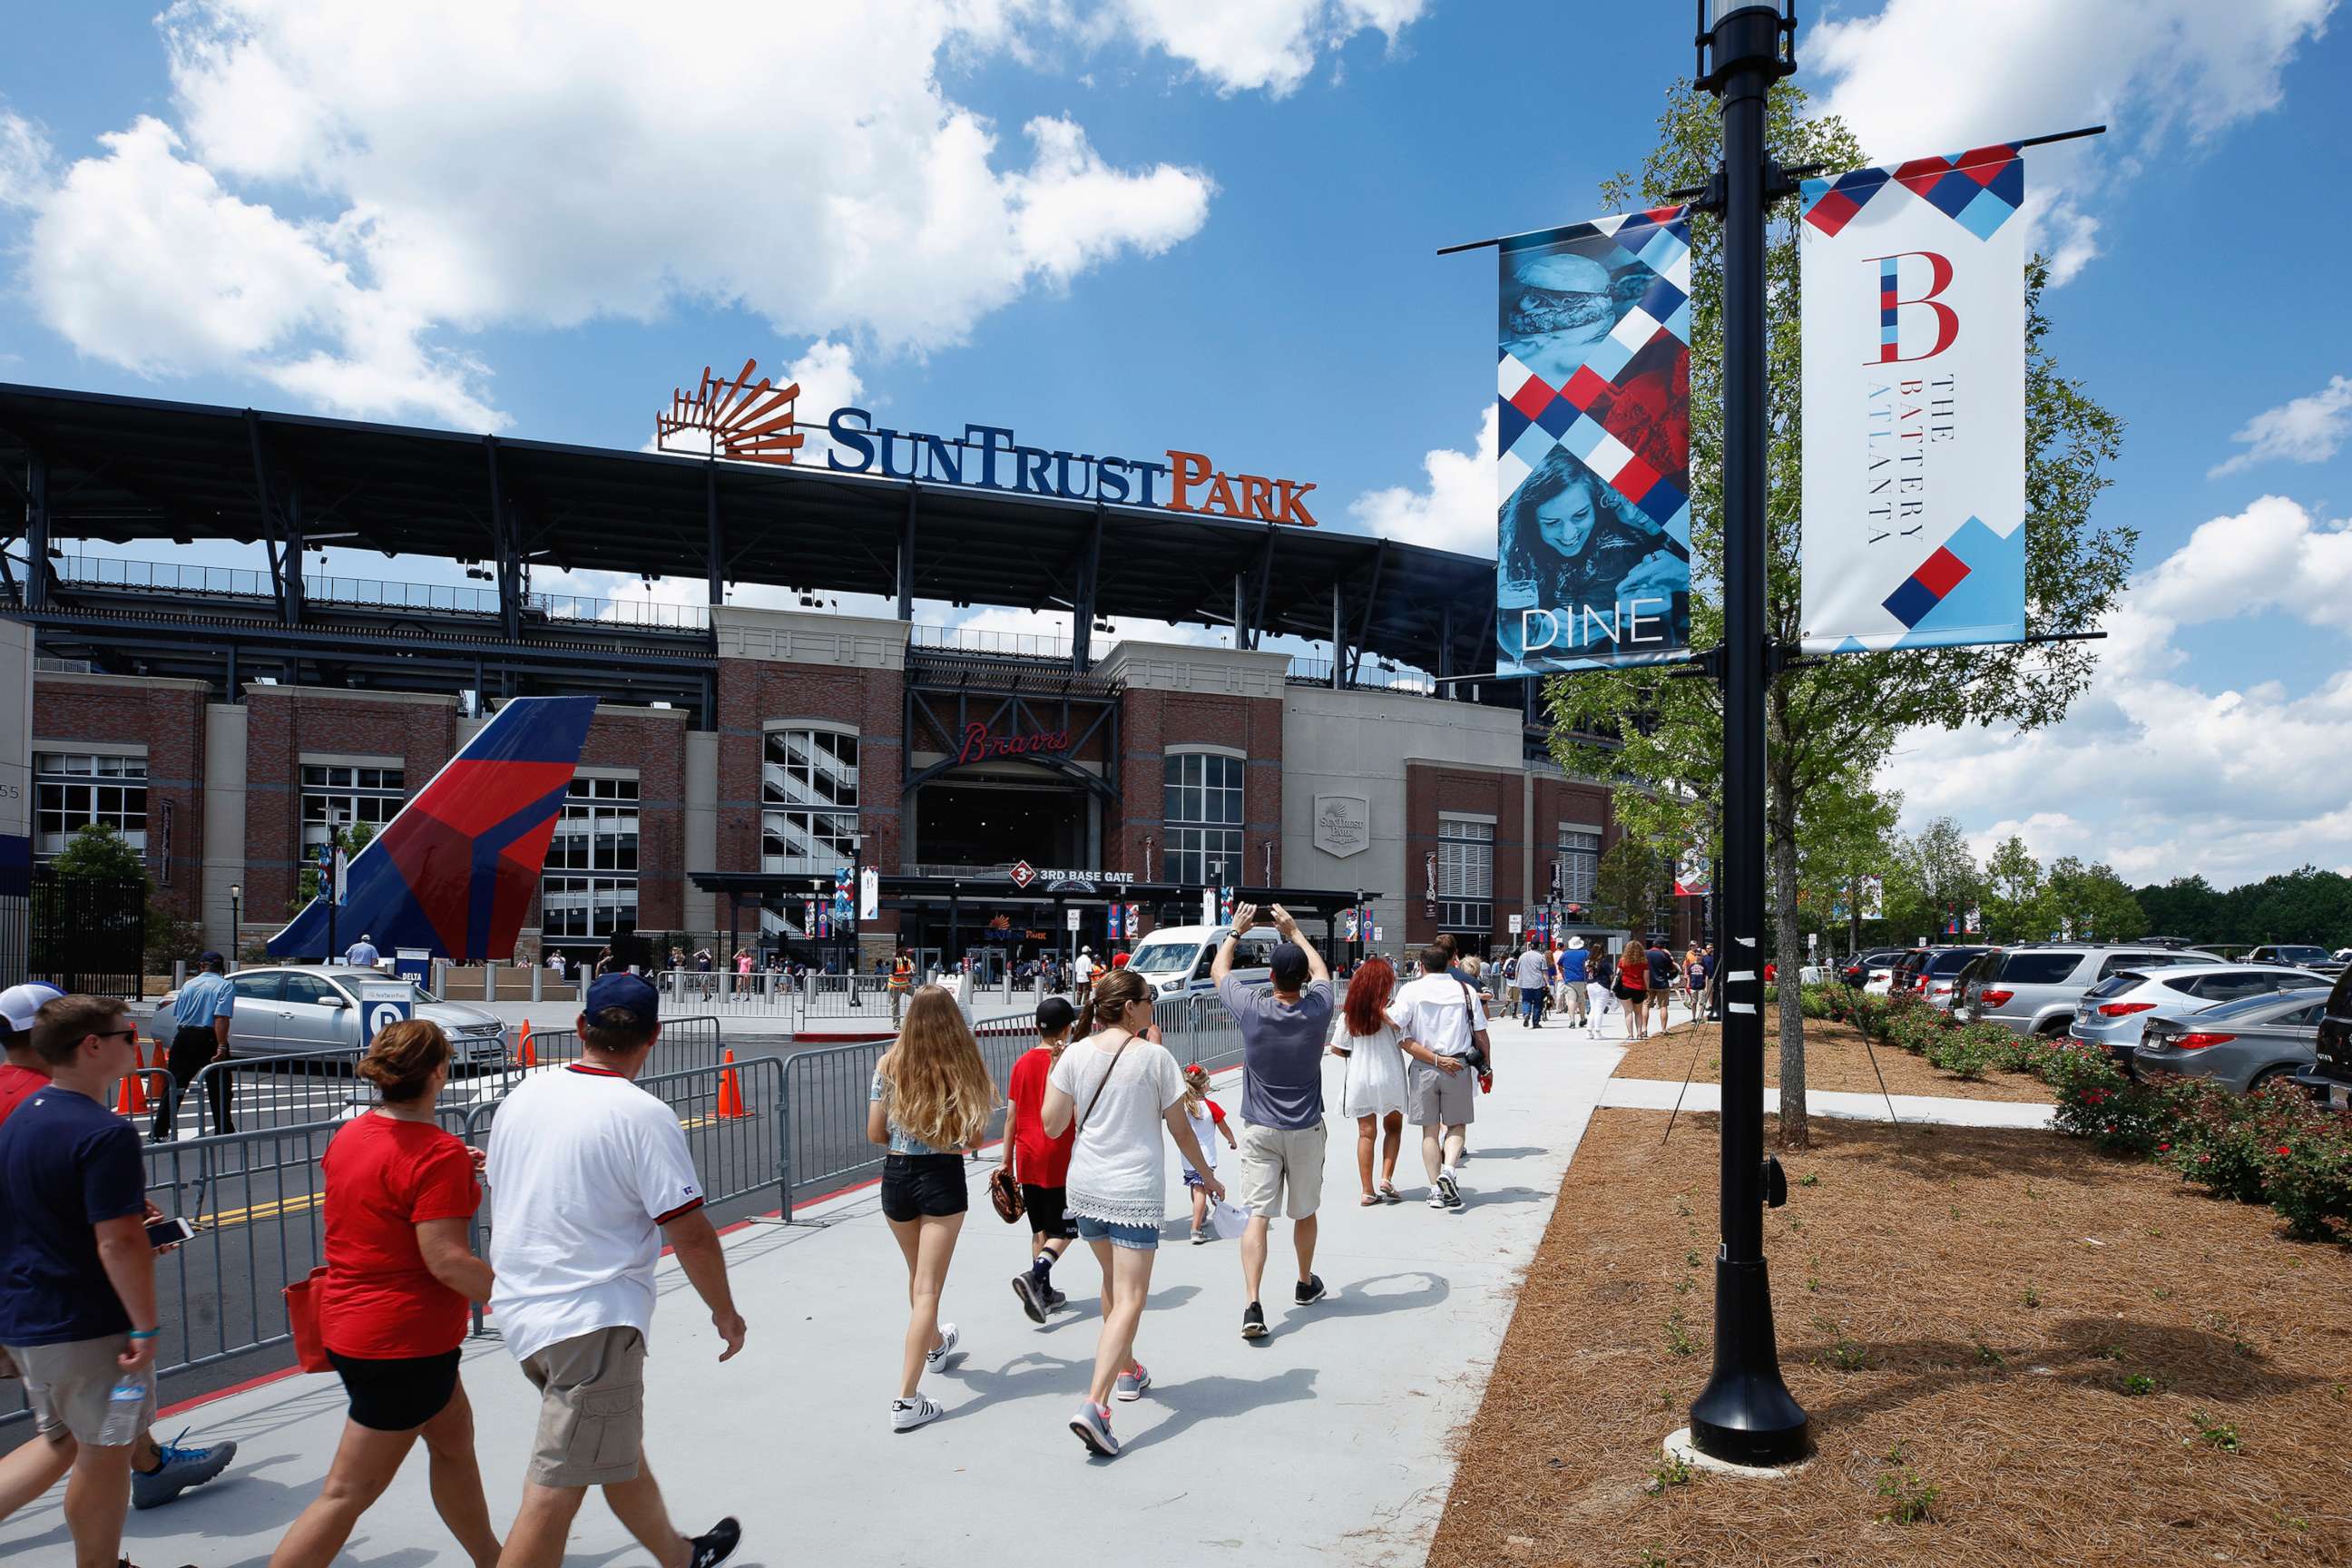 PHOTO: Fans make their way to a game between the New York Mets and Atlanta Braves at SunTrust Park on June 10, 2017 in Atlanta.